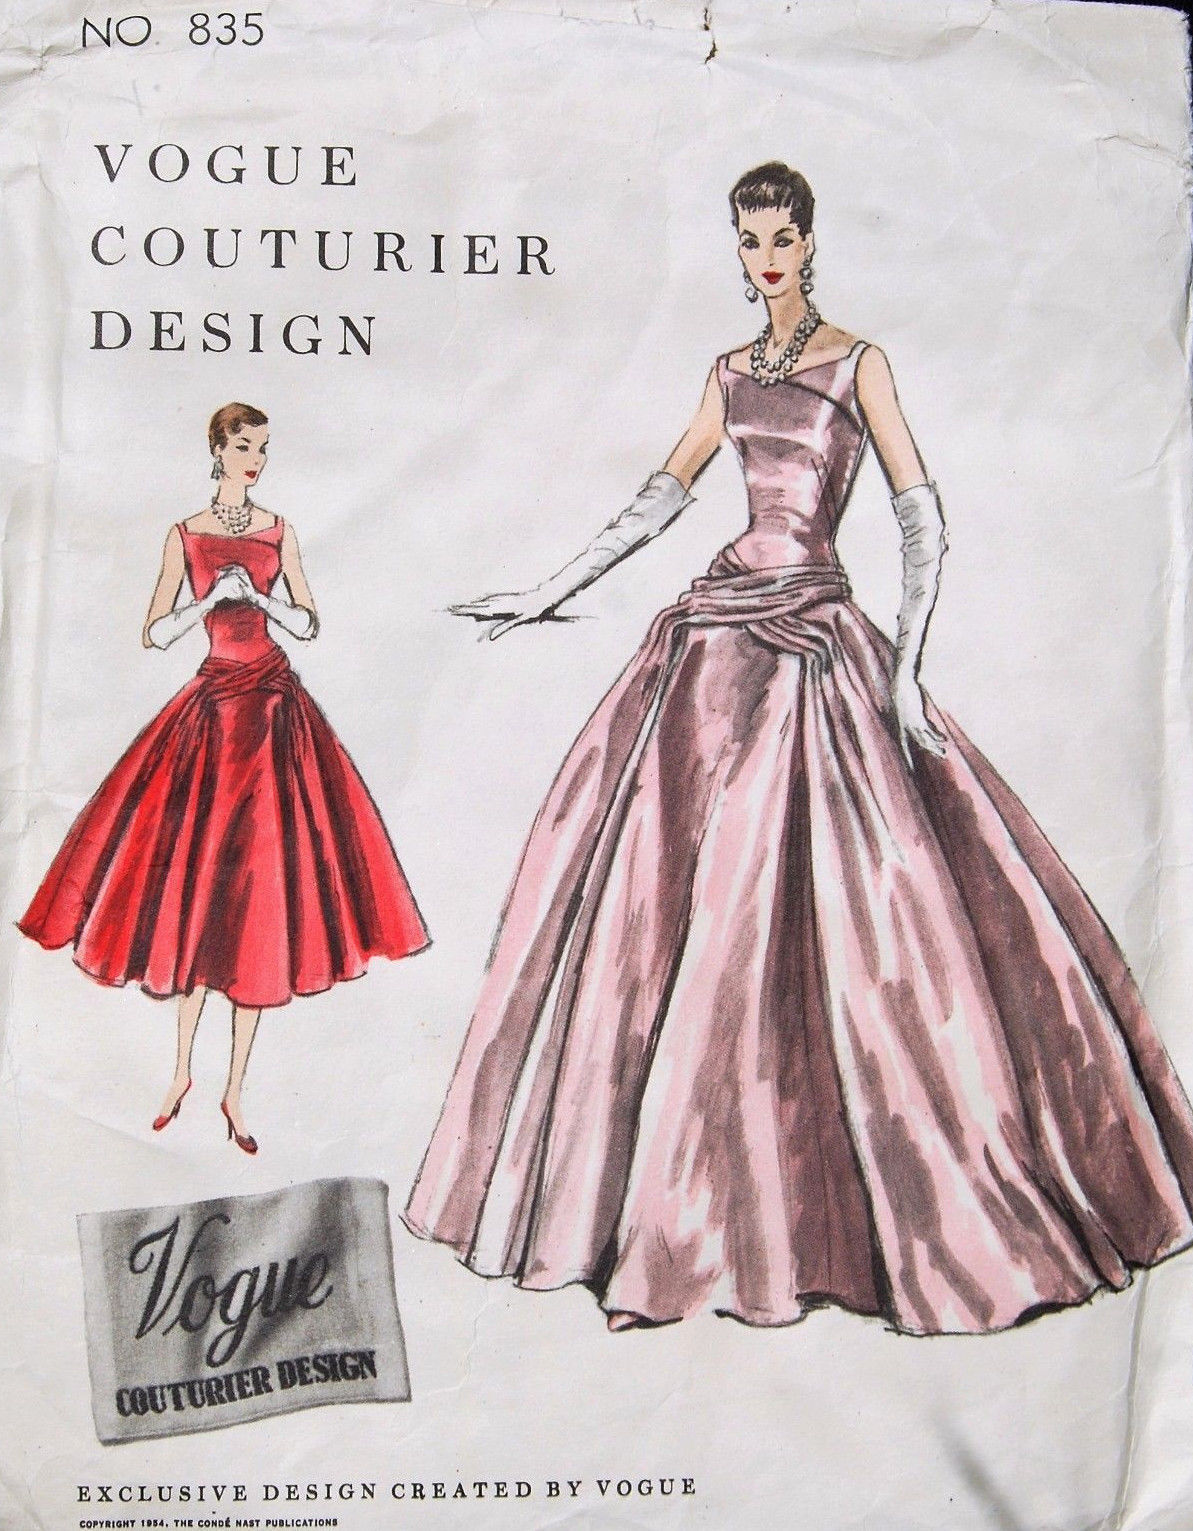 1974 Vintage Sewing Pattern B34 DRESS (1955) By McCall's 3971 - The  Vintage Pattern Shop